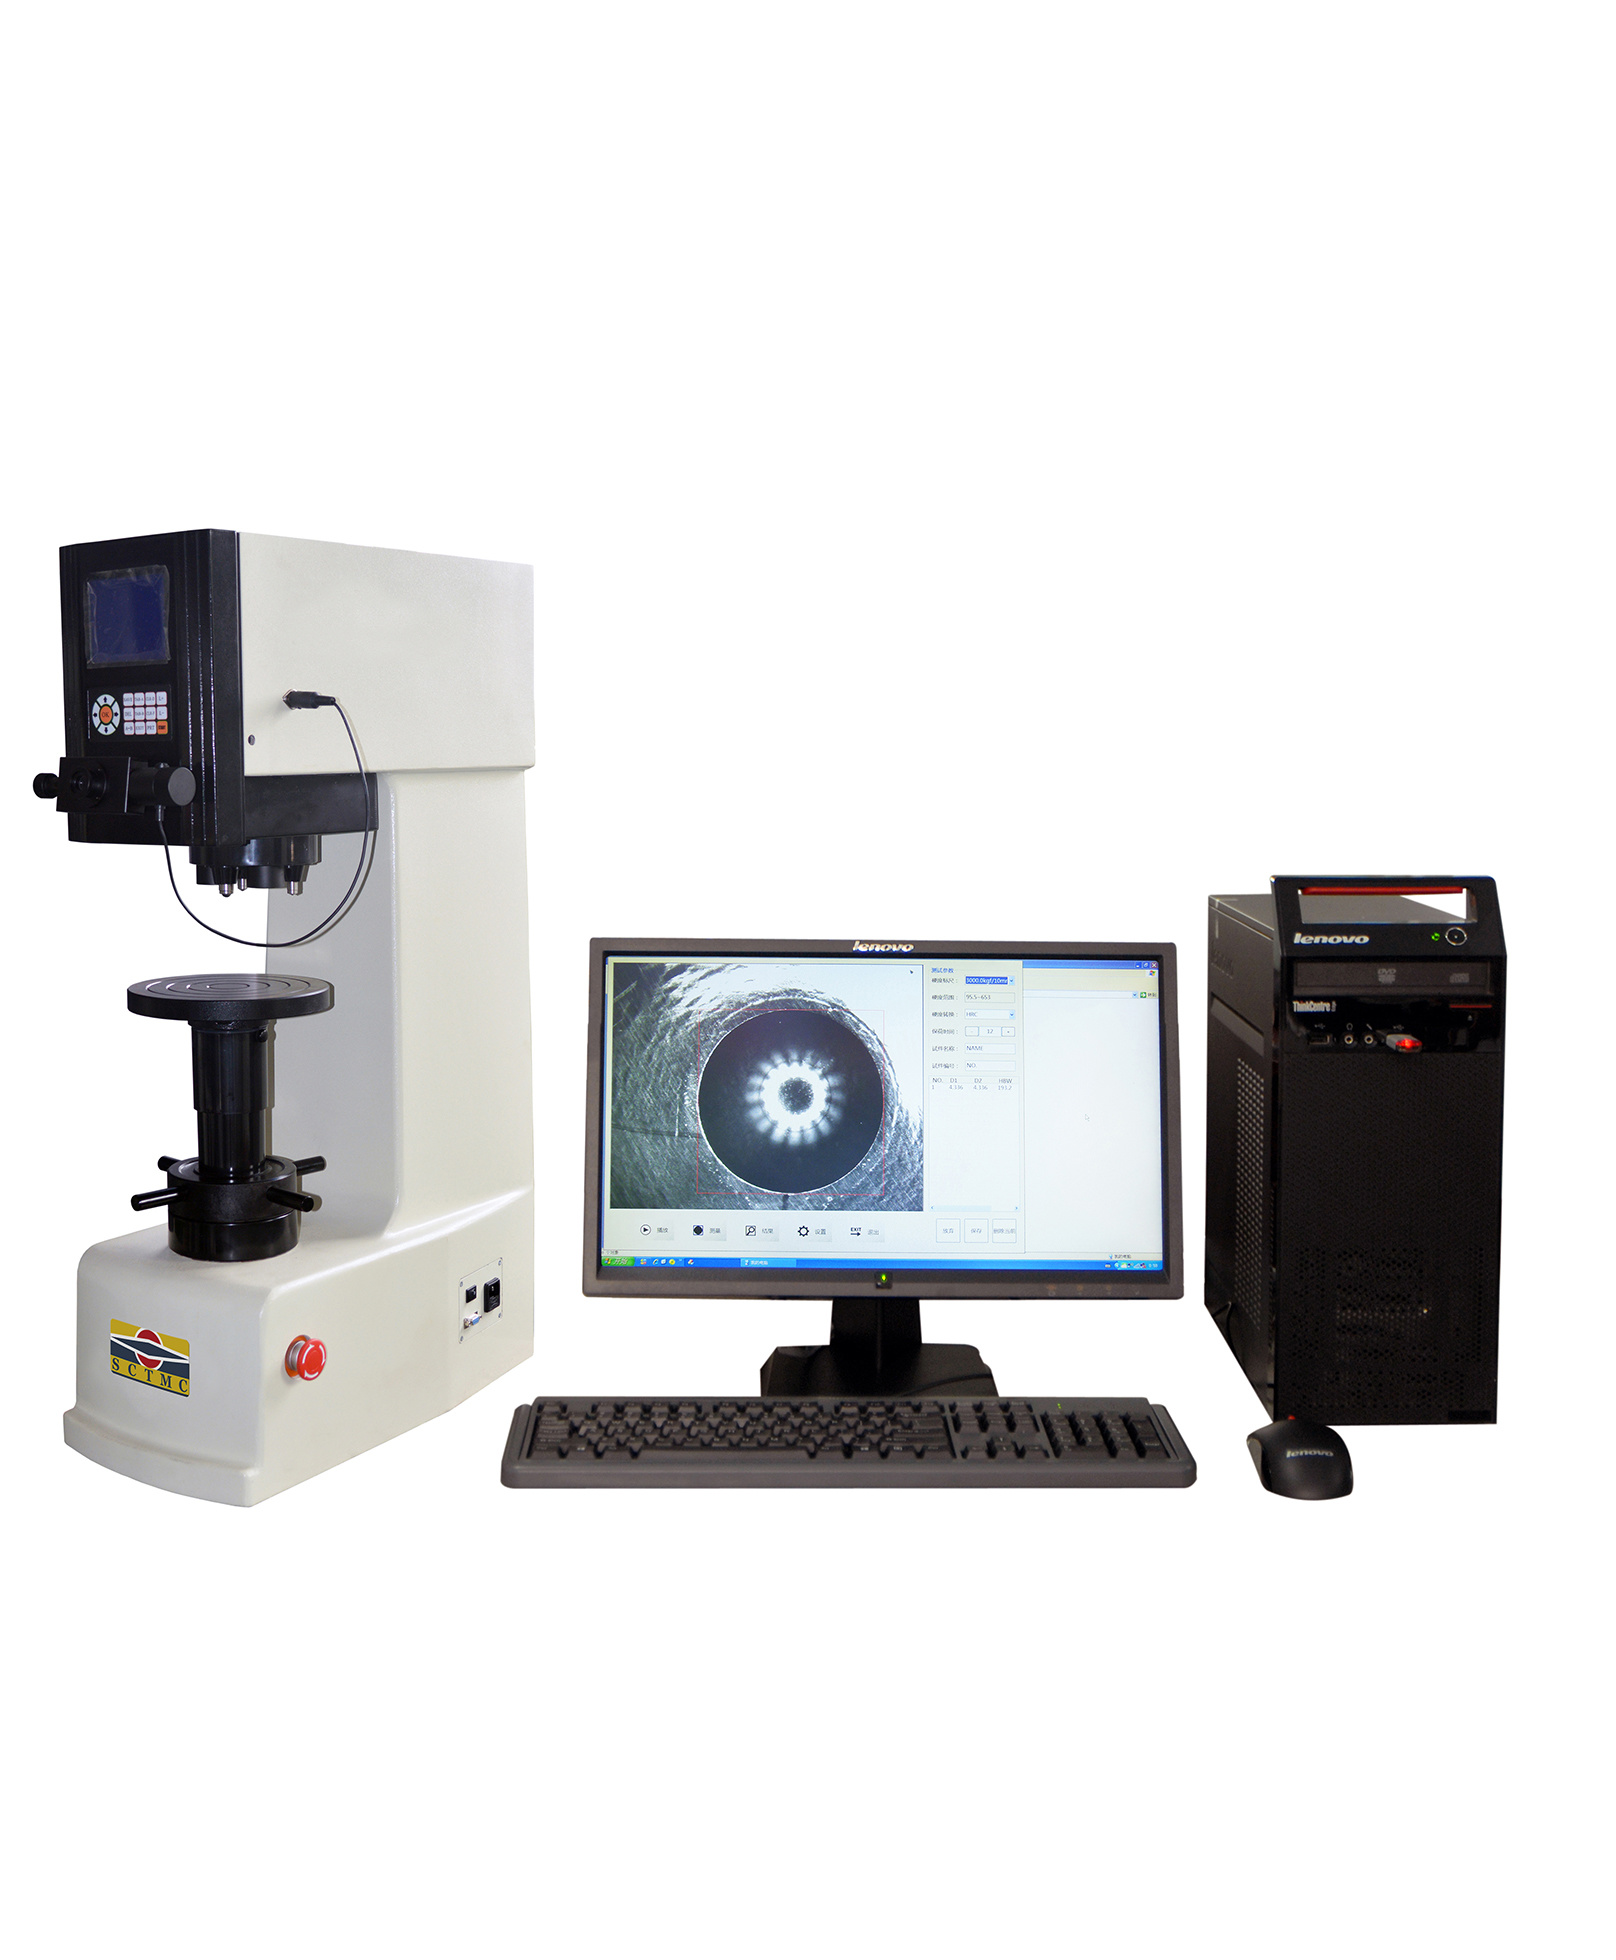 Brinell CCD Image Automatic Measuring System